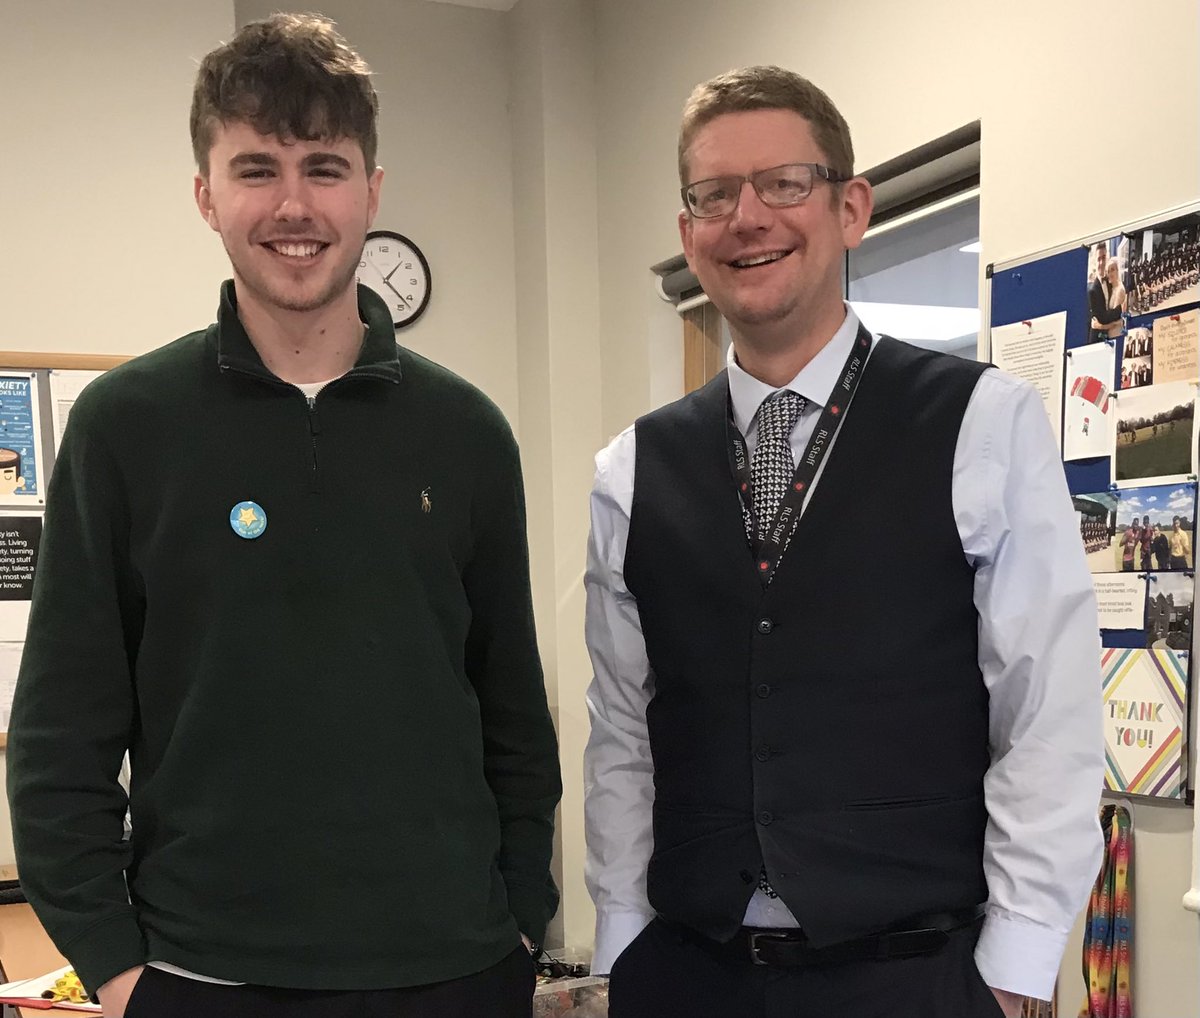 It’s always lovely when former students come back for a visit! Great to hear how Jake has been getting on in his first year at Birmingham 😀 @TheRoyalLatin @RLS6thform